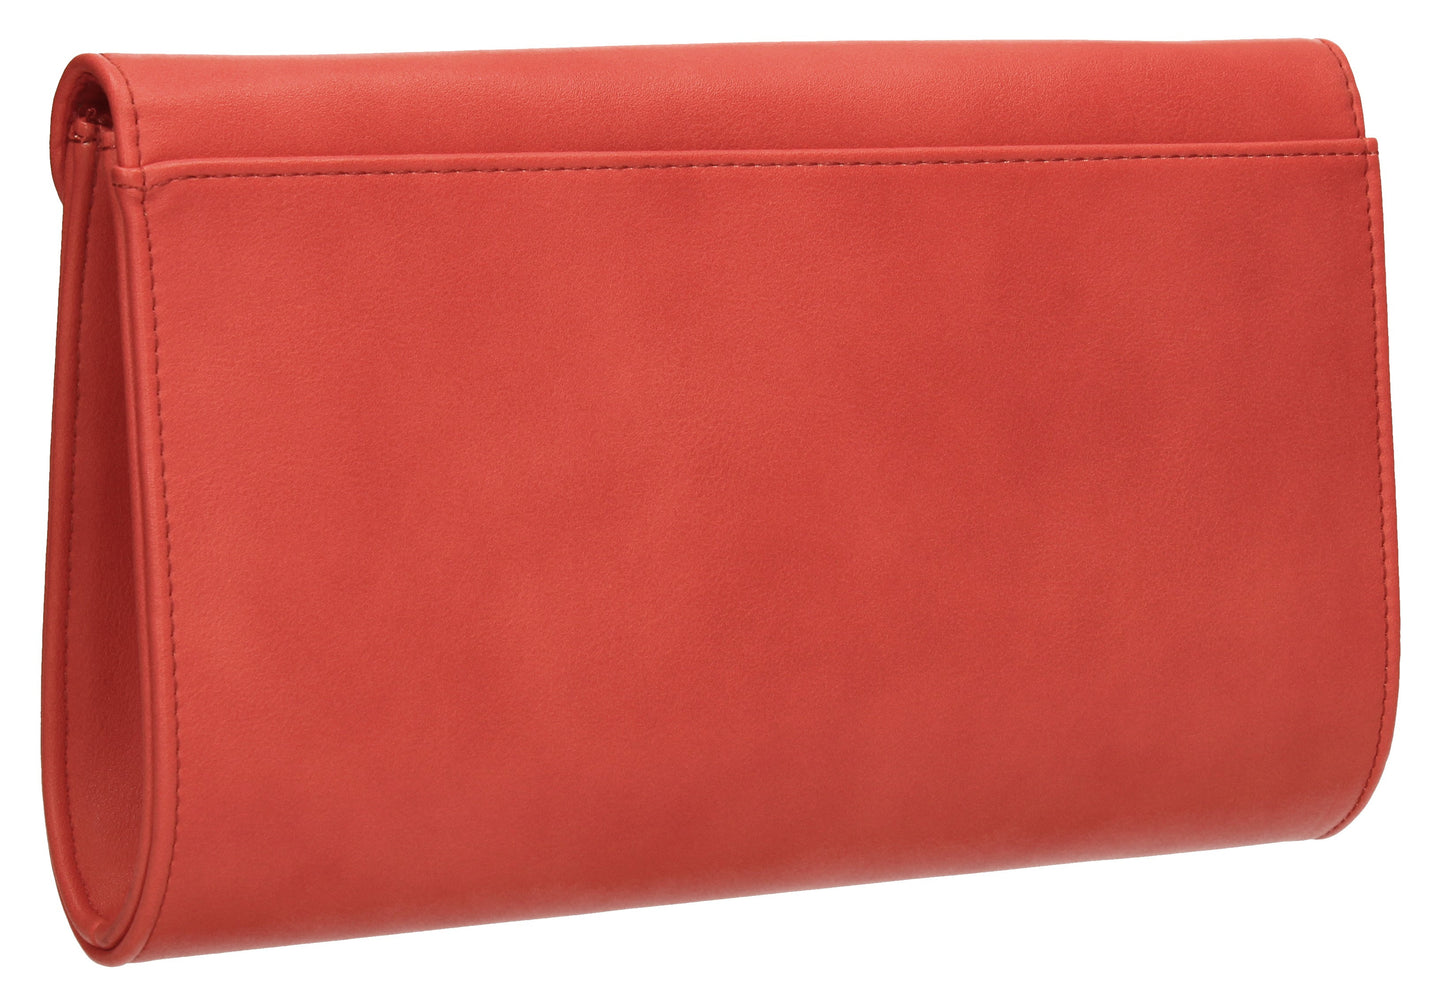 SWANKYSWANS Seraphina Clutch Bag Coral Cute Cheap Clutch Bag For Weddings School and Work